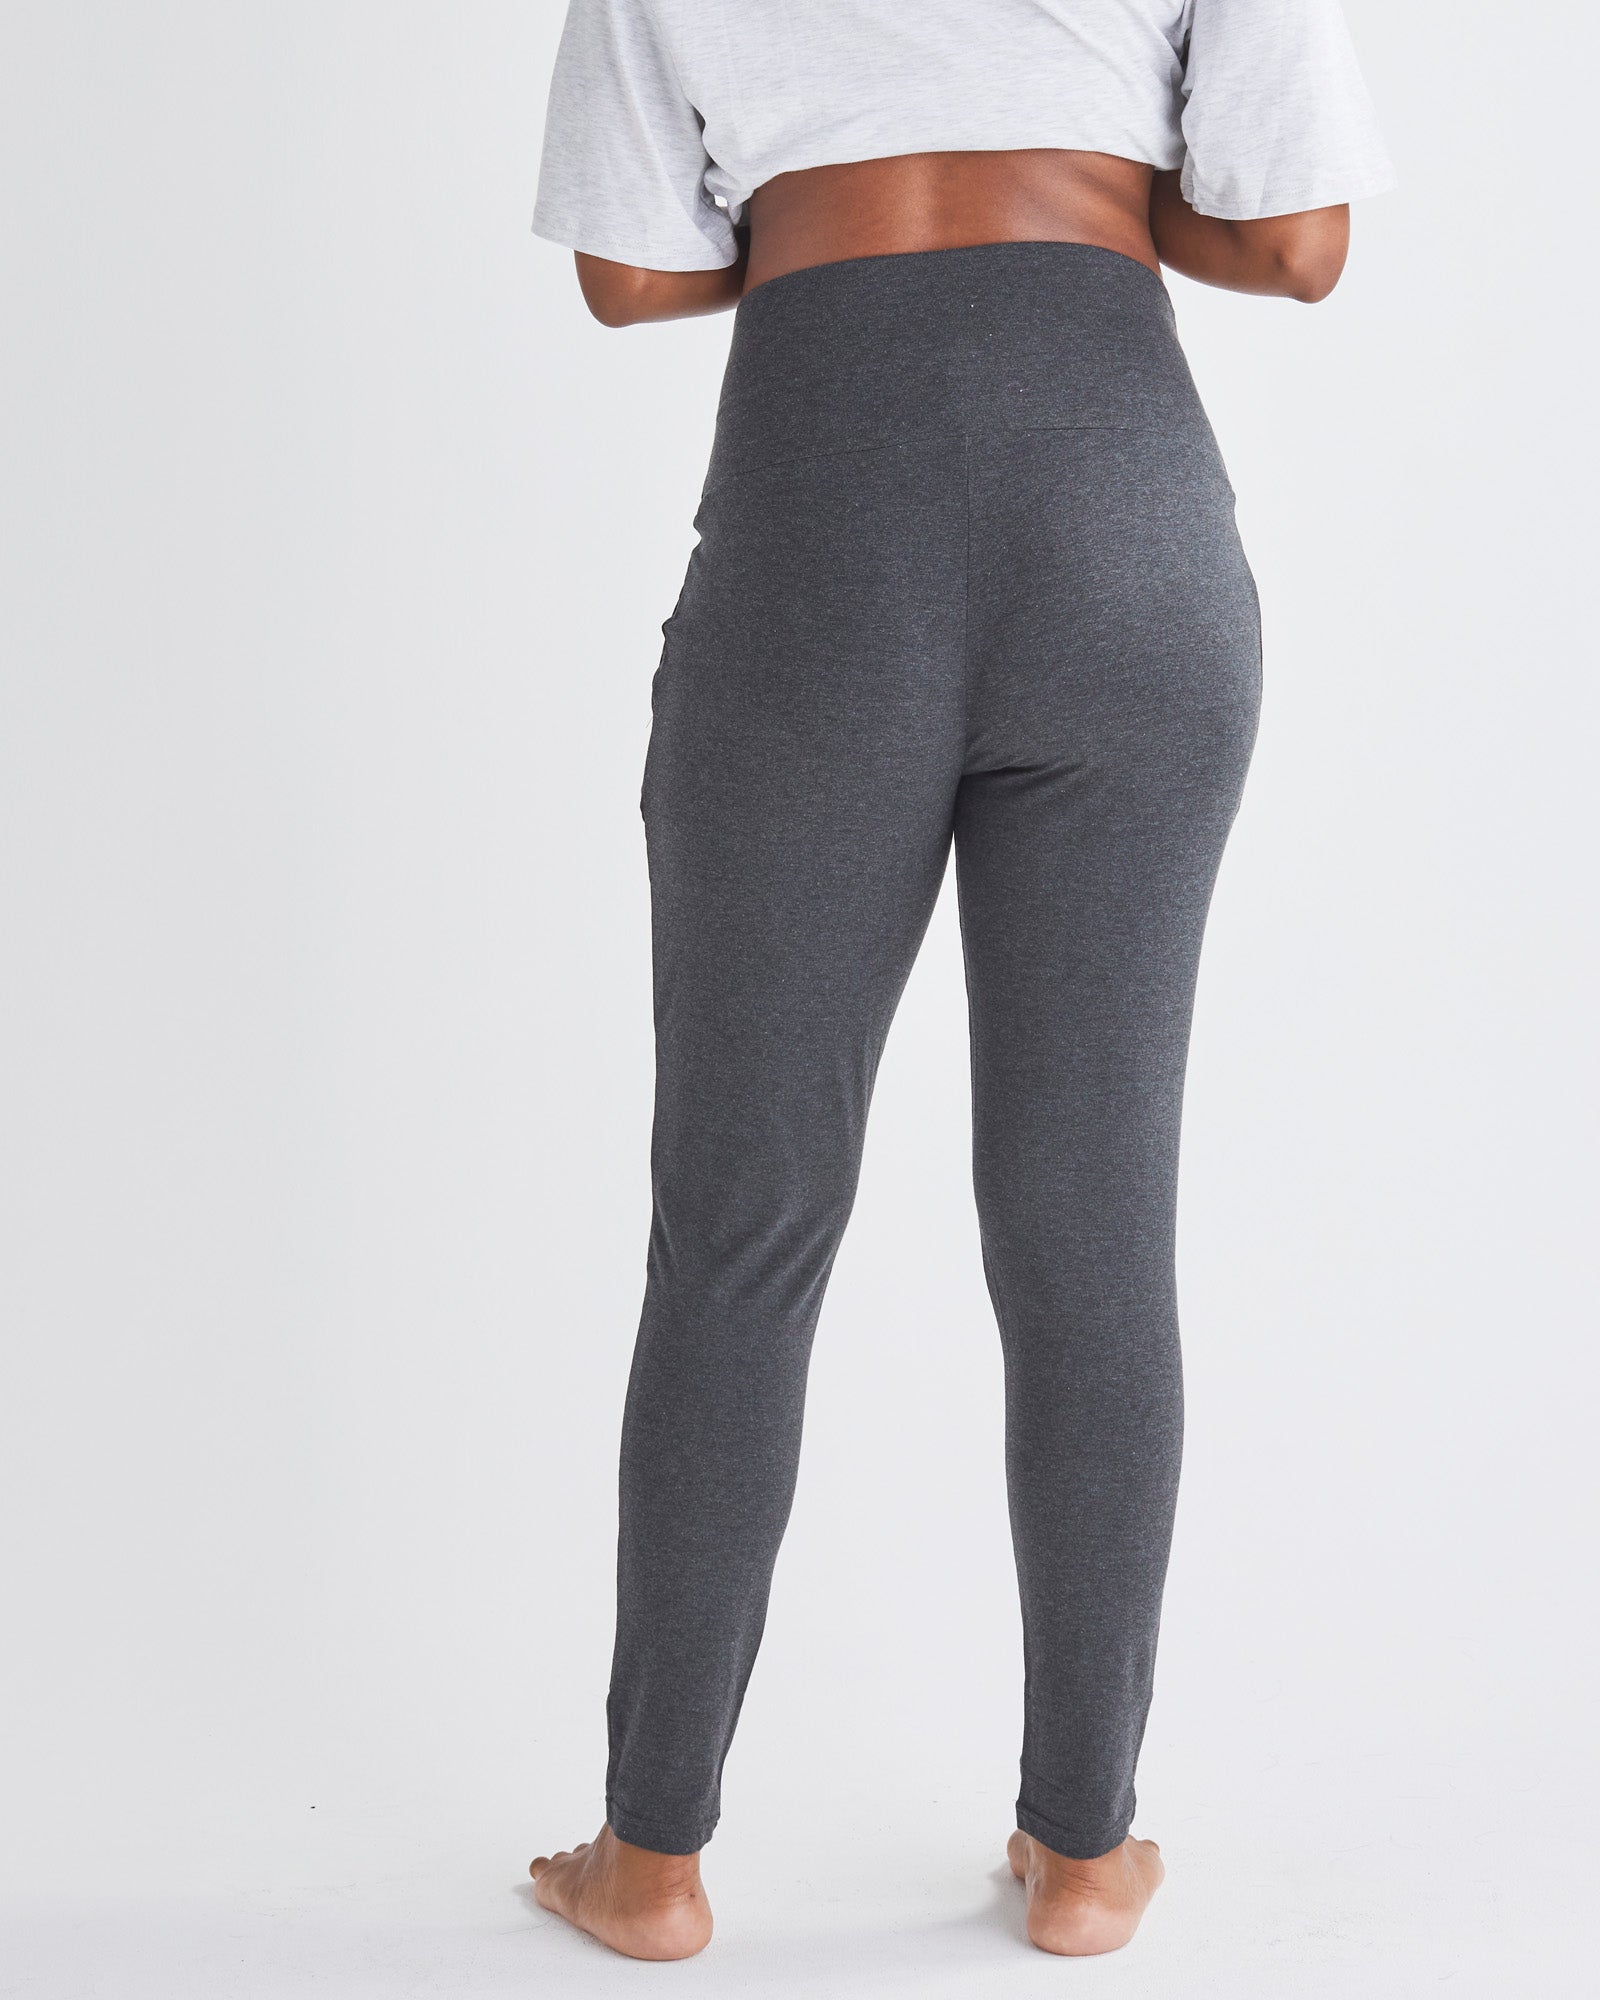 Back View - A Pregnannt Woman Wearing Eden Ultra Soft Maternity Lounge Pants in Charcoal from Angel Maternity.